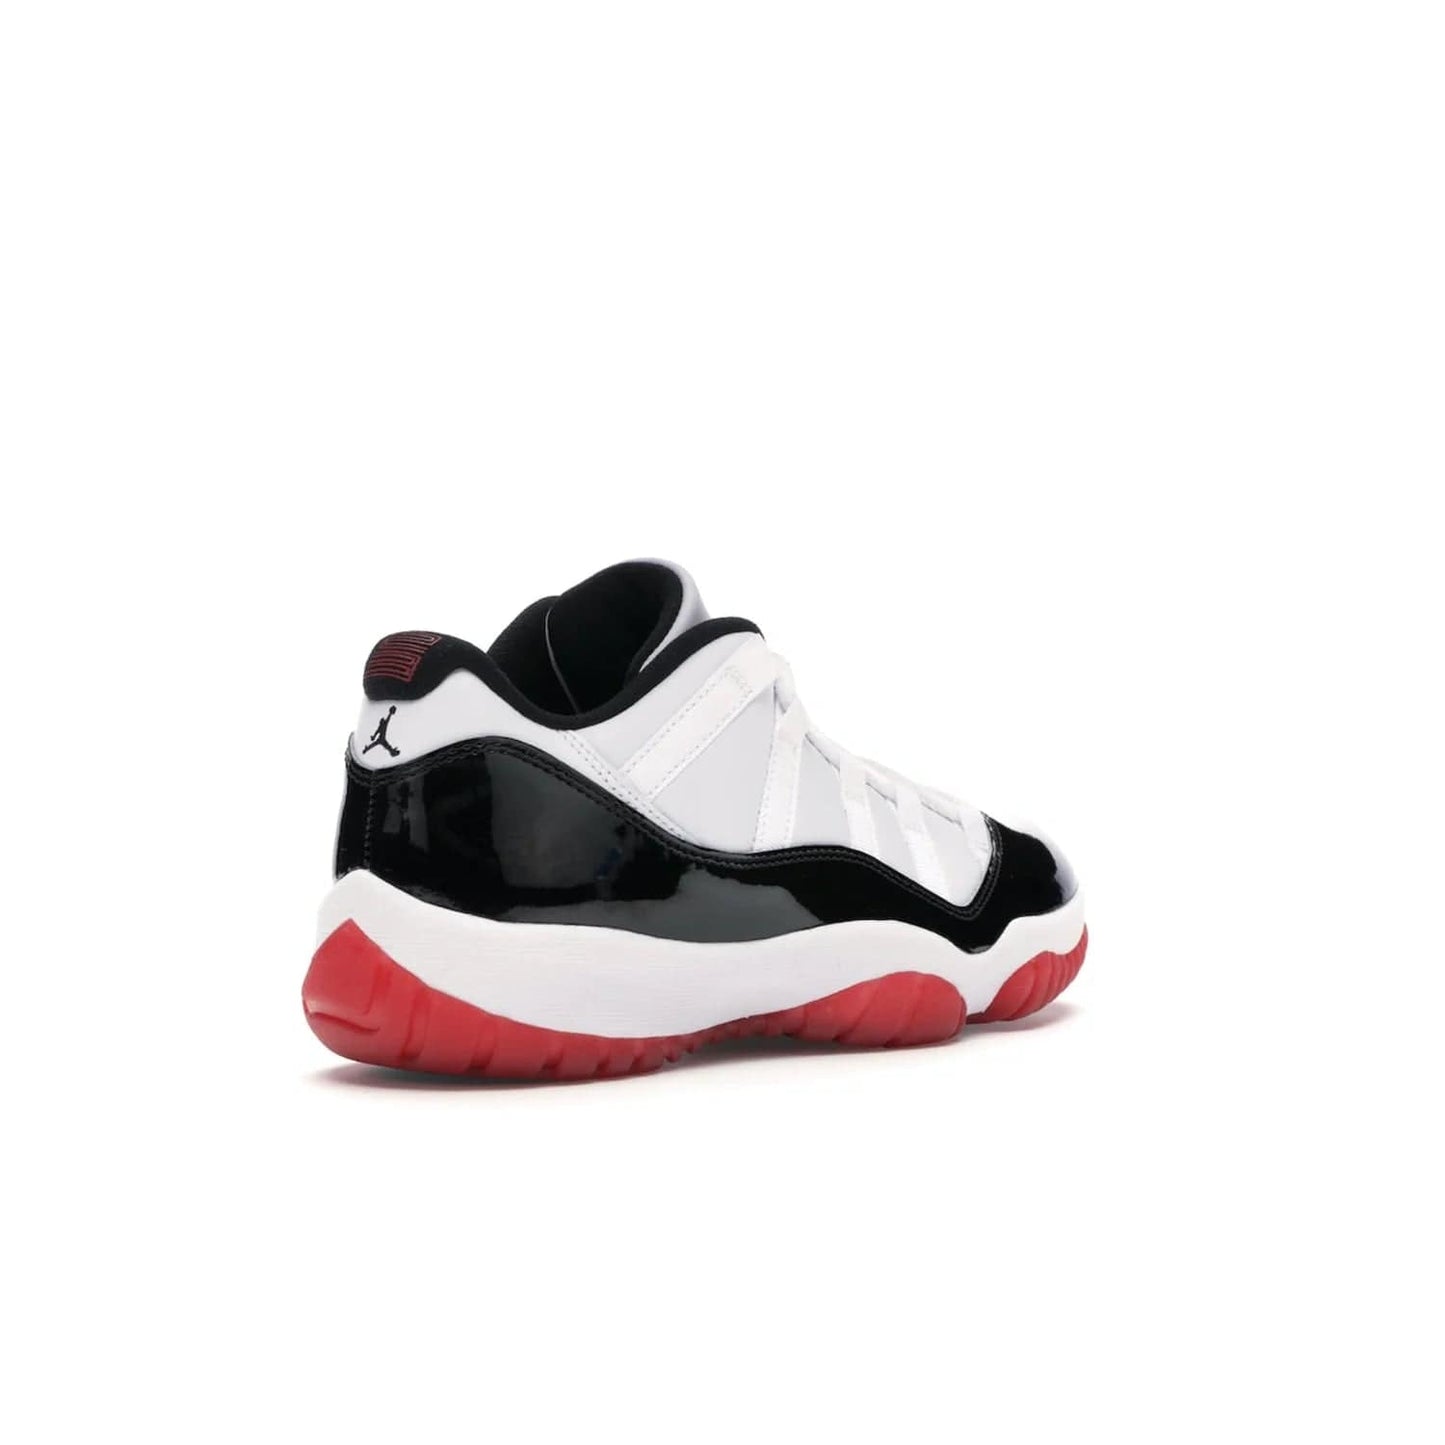 Jordan 11 Retro Low Concord Bred - Image 32 - Only at www.BallersClubKickz.com - Grab the classic Jordan 11 look with the Jordan 11 Retro Low Concord Bred. With white and black elements and the iconic red outsole of the Jordan 11 Bred, you won't miss a beat. Released in June 2020, the perfect complement to any outfit.